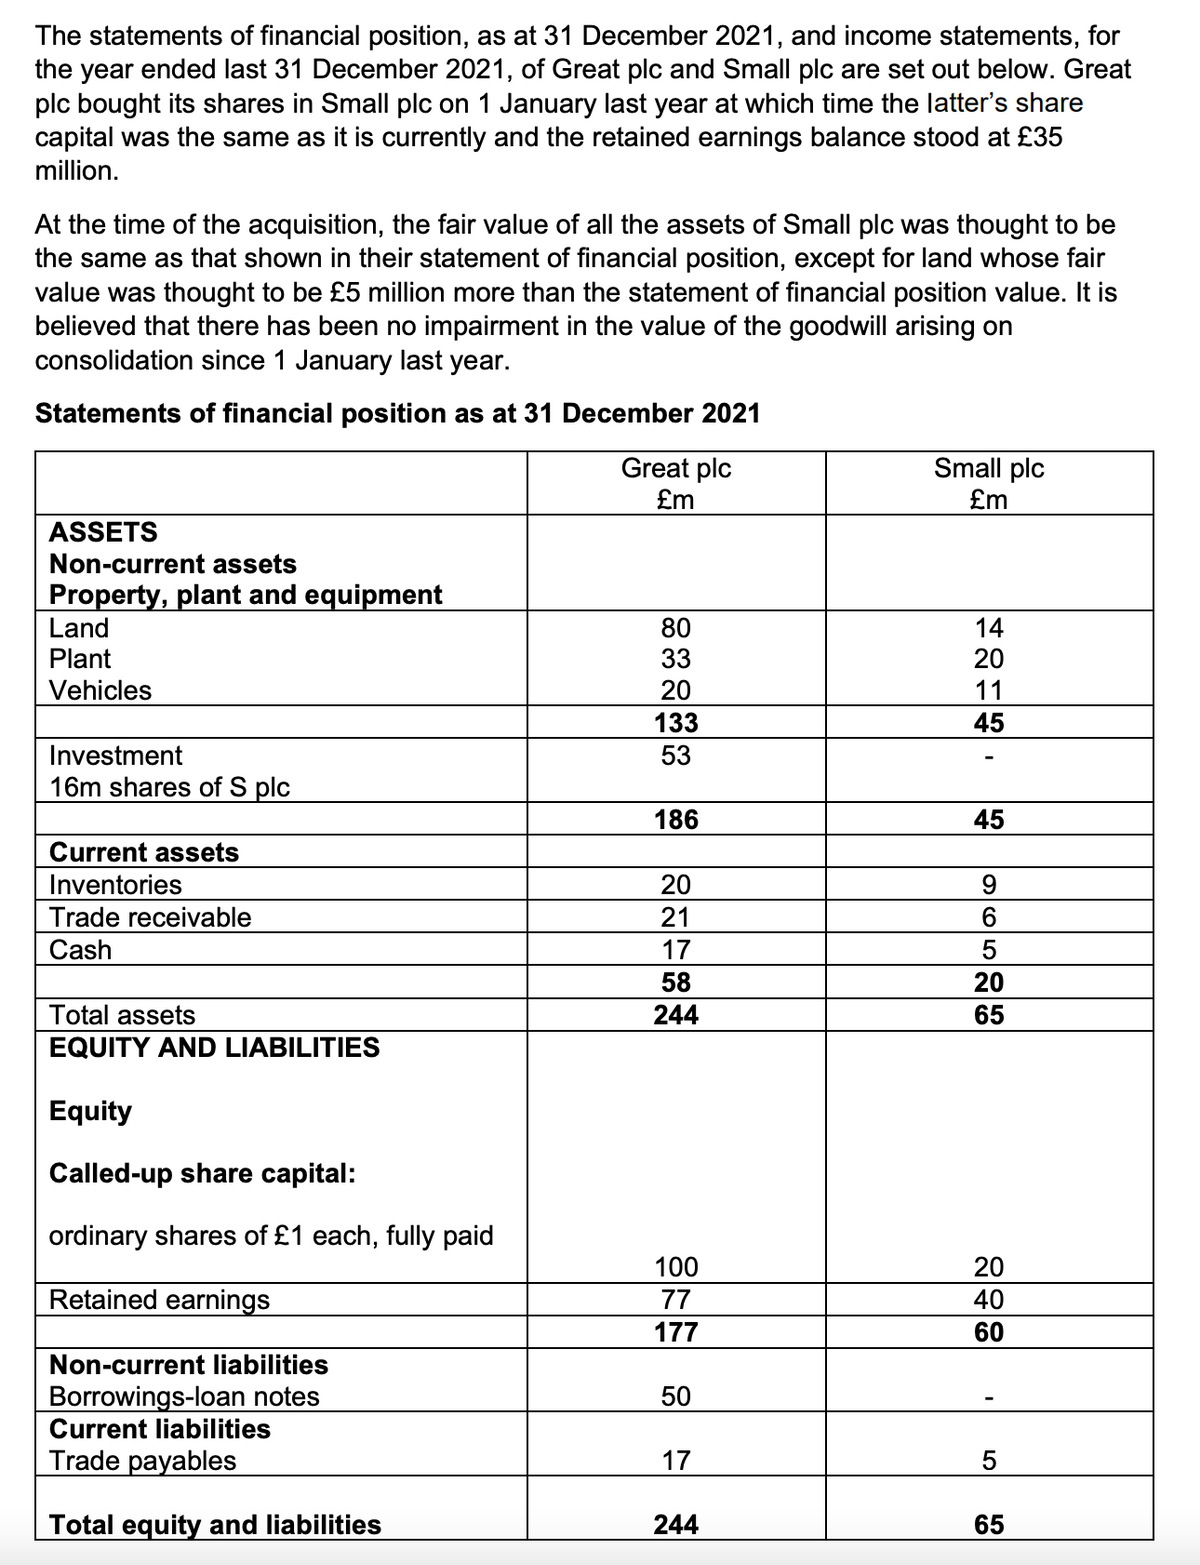 The statements of financial position, as at 31 December 2021, and income statements, for
the year ended last 31 December 2021, of Great plc and Small plc are set out below. Great
plc bought its shares in Small plc on 1 January last year at which time the latter's share
capital was the same as it is currently and the retained earnings balance stood at £35
million.
At the time of the acquisition, the fair value of all the assets of Small plc was thought to be
the same as that shown in their statement of financial position, except for land whose fair
value was thought to be £5 million more than the statement of financial position value. It is
believed that there has been no impairment in the value of the goodwill arising on
consolidation since 1 January last year.
Statements of financial position as at 31 December 2021
Great plc
Small plc
£m
£m
ASSETS
Non-current assets
Property, plant and equipment
Land
80
14
Plant
33
20
Vehicles
20
11
133
45
Investment
53
16m shares of S plc
186
45
Current assets
Inventories
20
9
Trade receivable
21
Cash
17
5
58
20
Total assets
244
65
EQUITY AND LIABILITIES
Equity
Called-up share capital:
ordinary shares of £1 each, fully paid
100
20
Retained earnings
77
40
177
60
Non-current liabilities
Borrowings-loan notes
50
Current liabilities
Trade payables
17
5
Total equity and liabilities
244
65